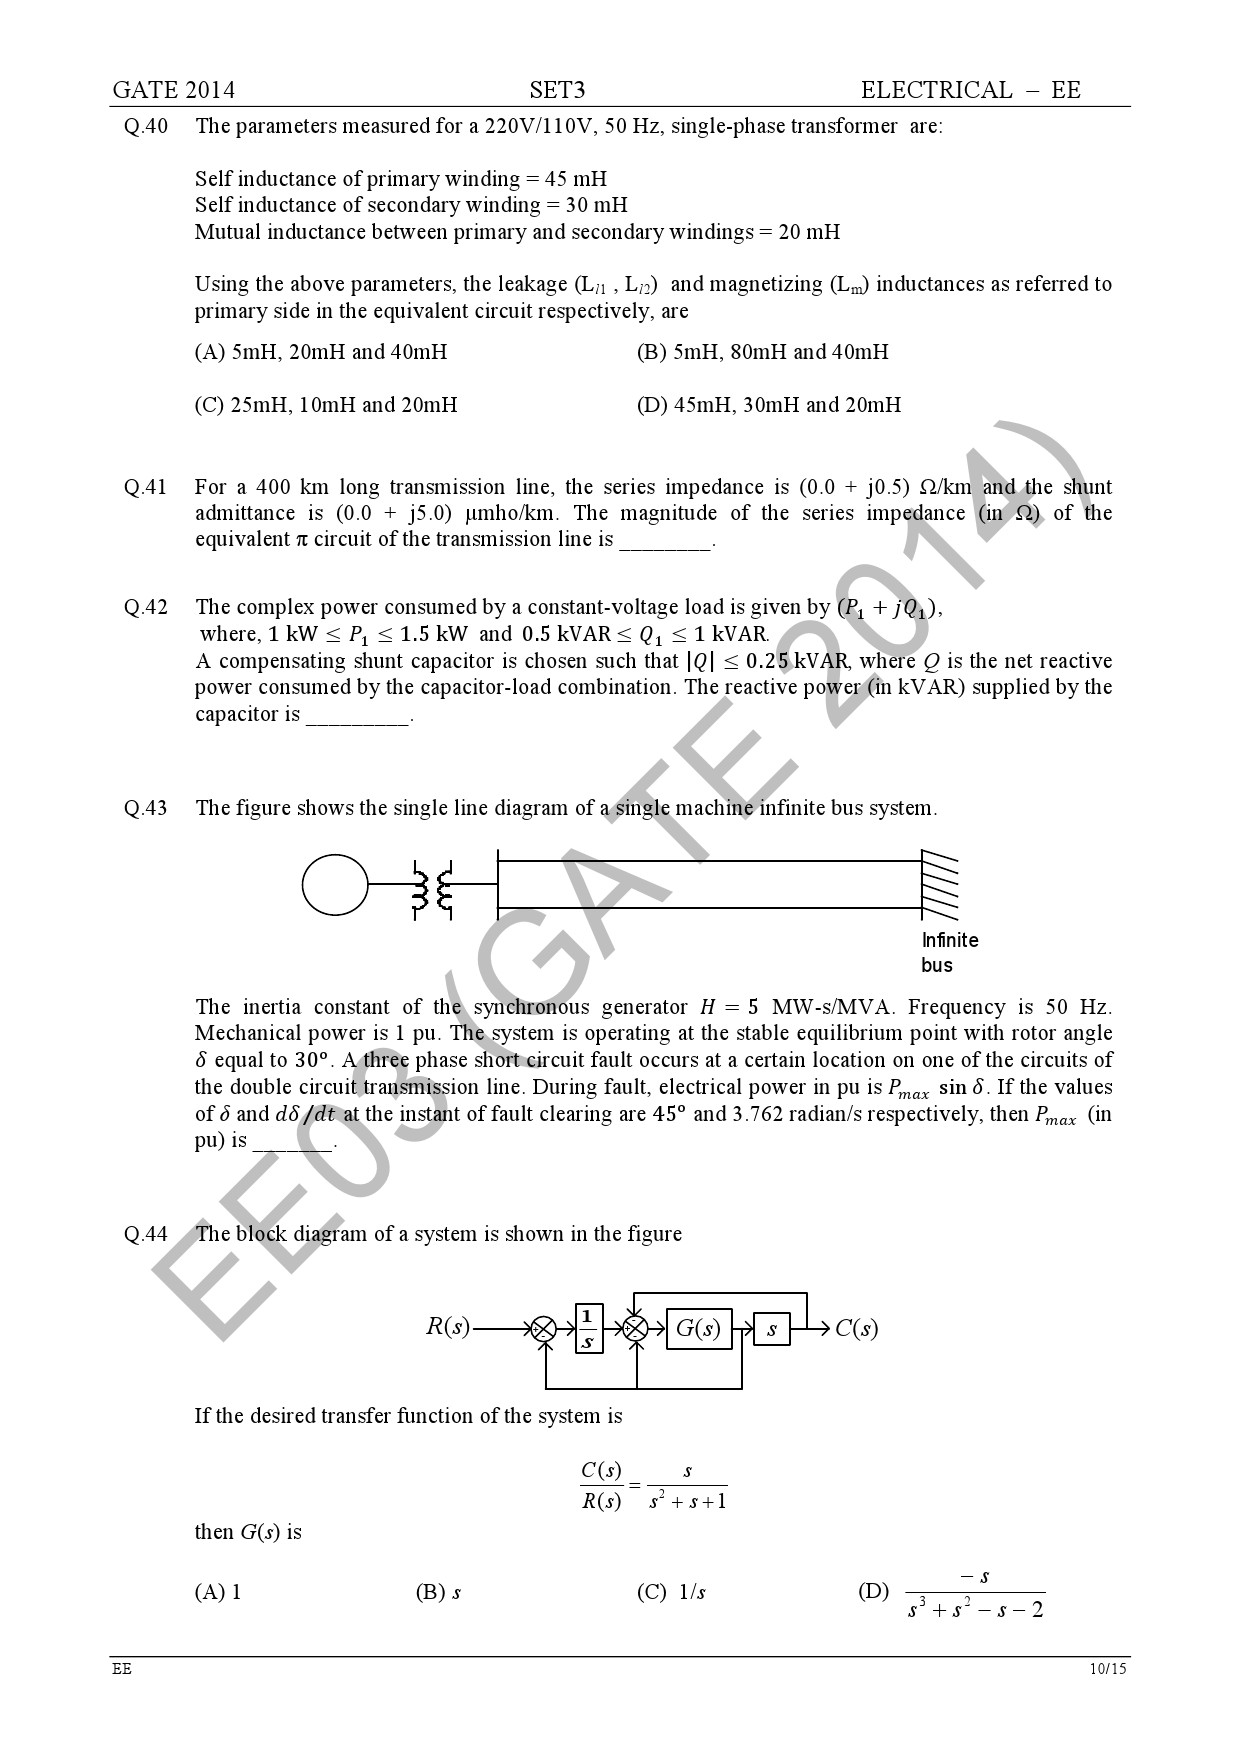 GATE Exam Question Paper 2014 Electrical Engineering Set 3 16